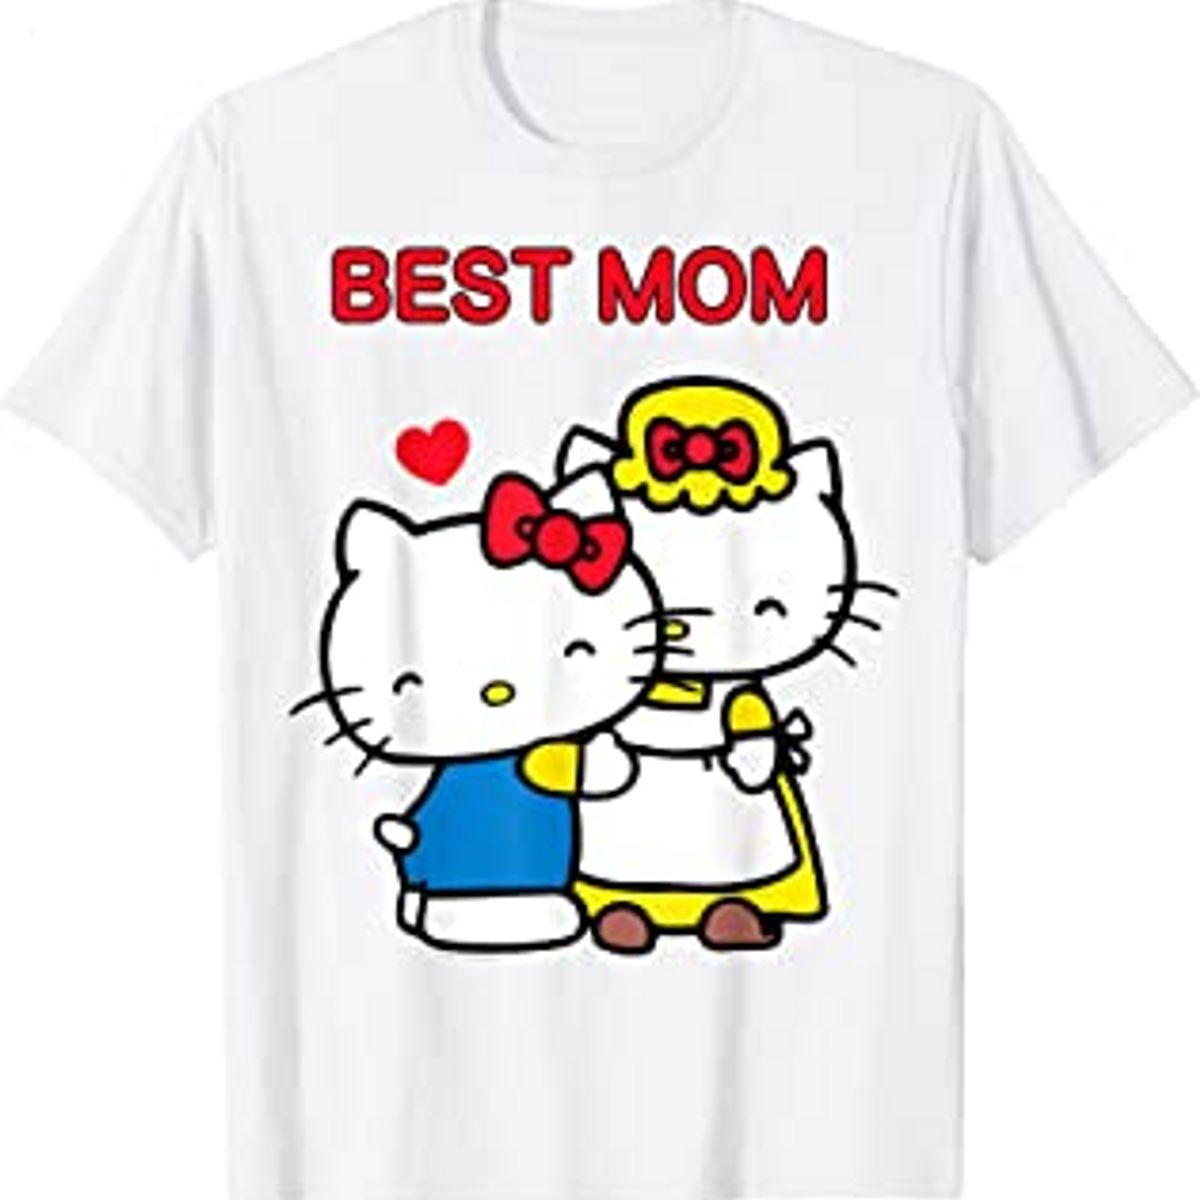 Mother’s Day Best Mom Tee Shirt